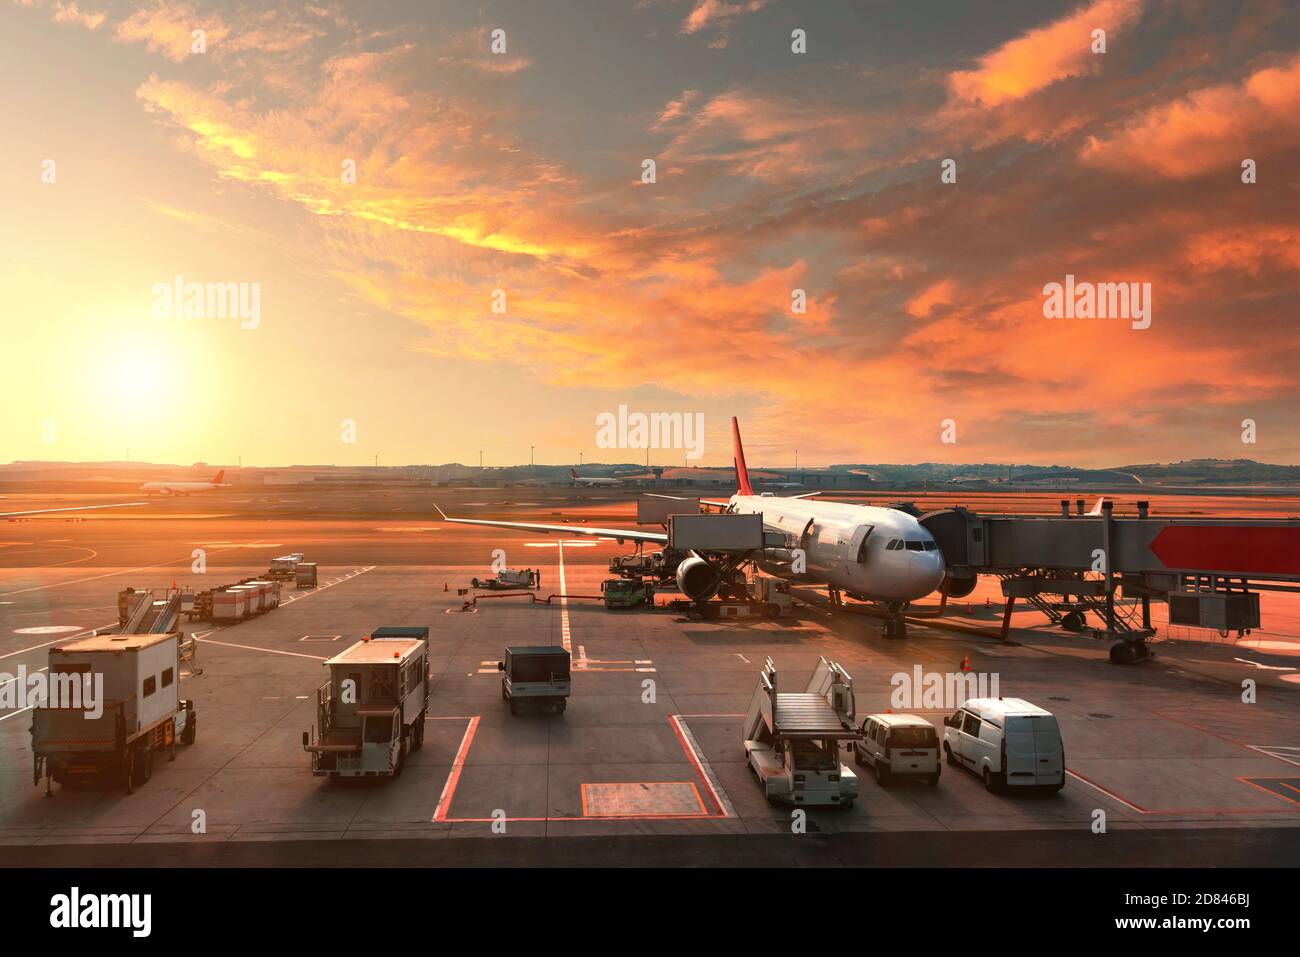 stunning sunset at the airport. Stock Photo